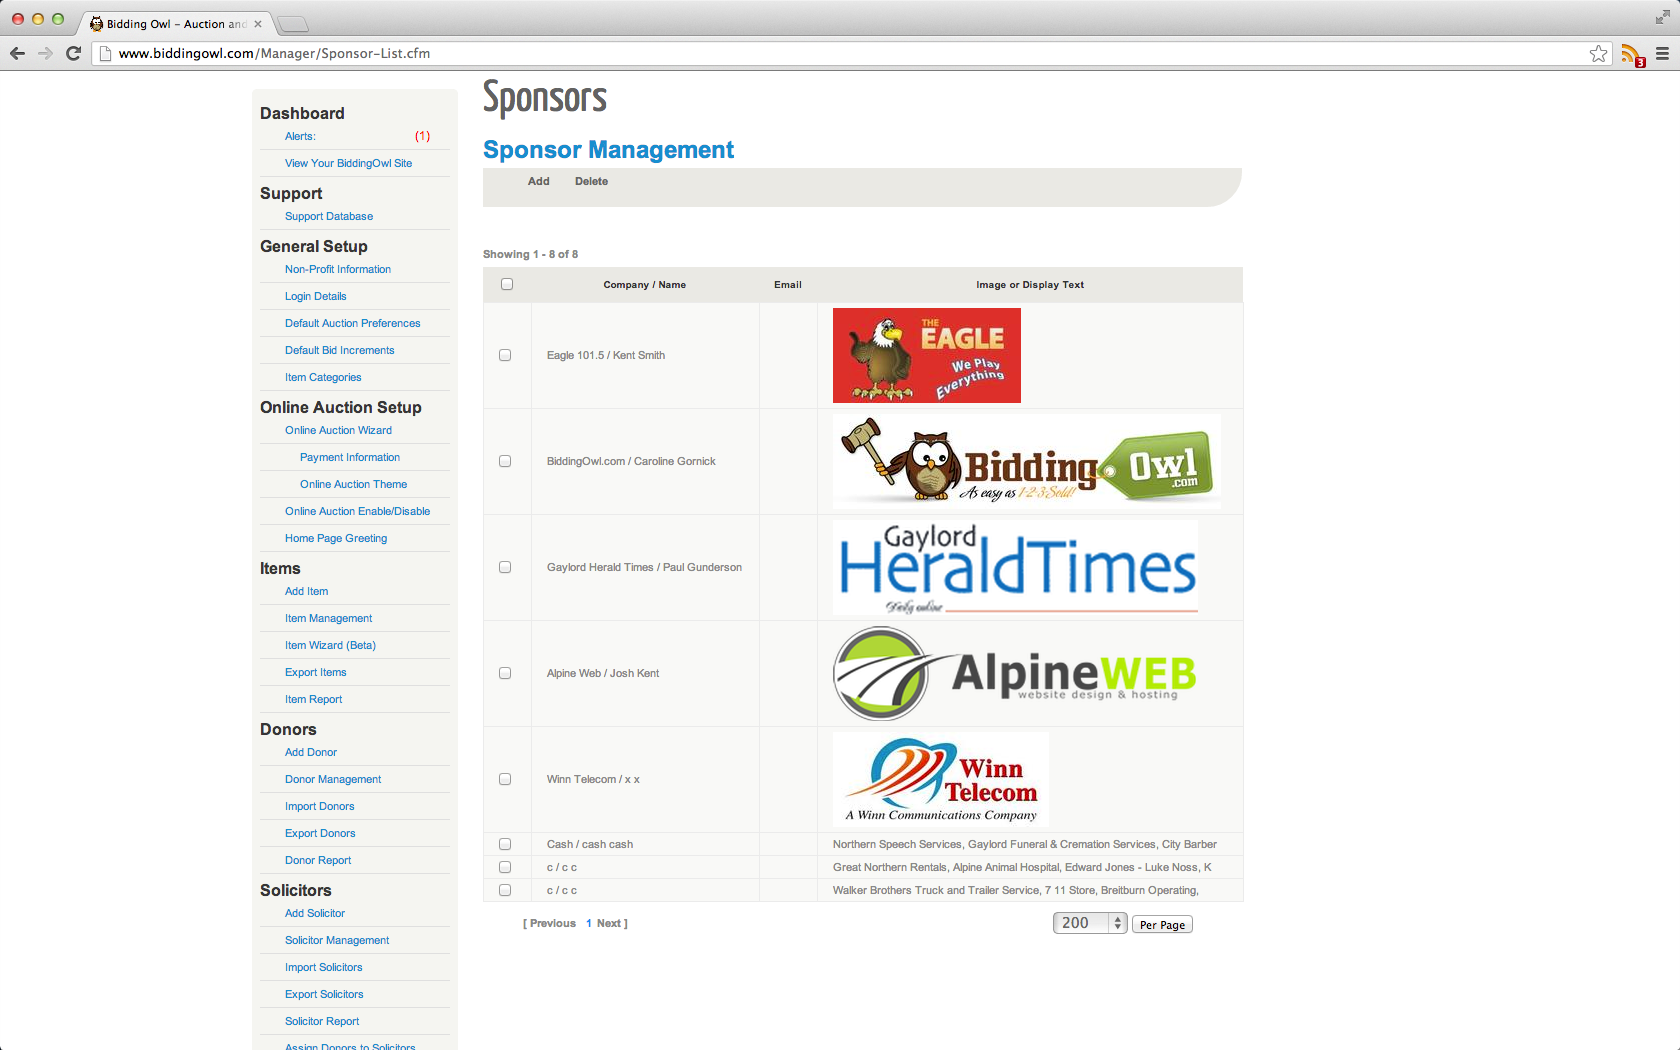 Up-sell your event through sponsorships that are displayed on your website